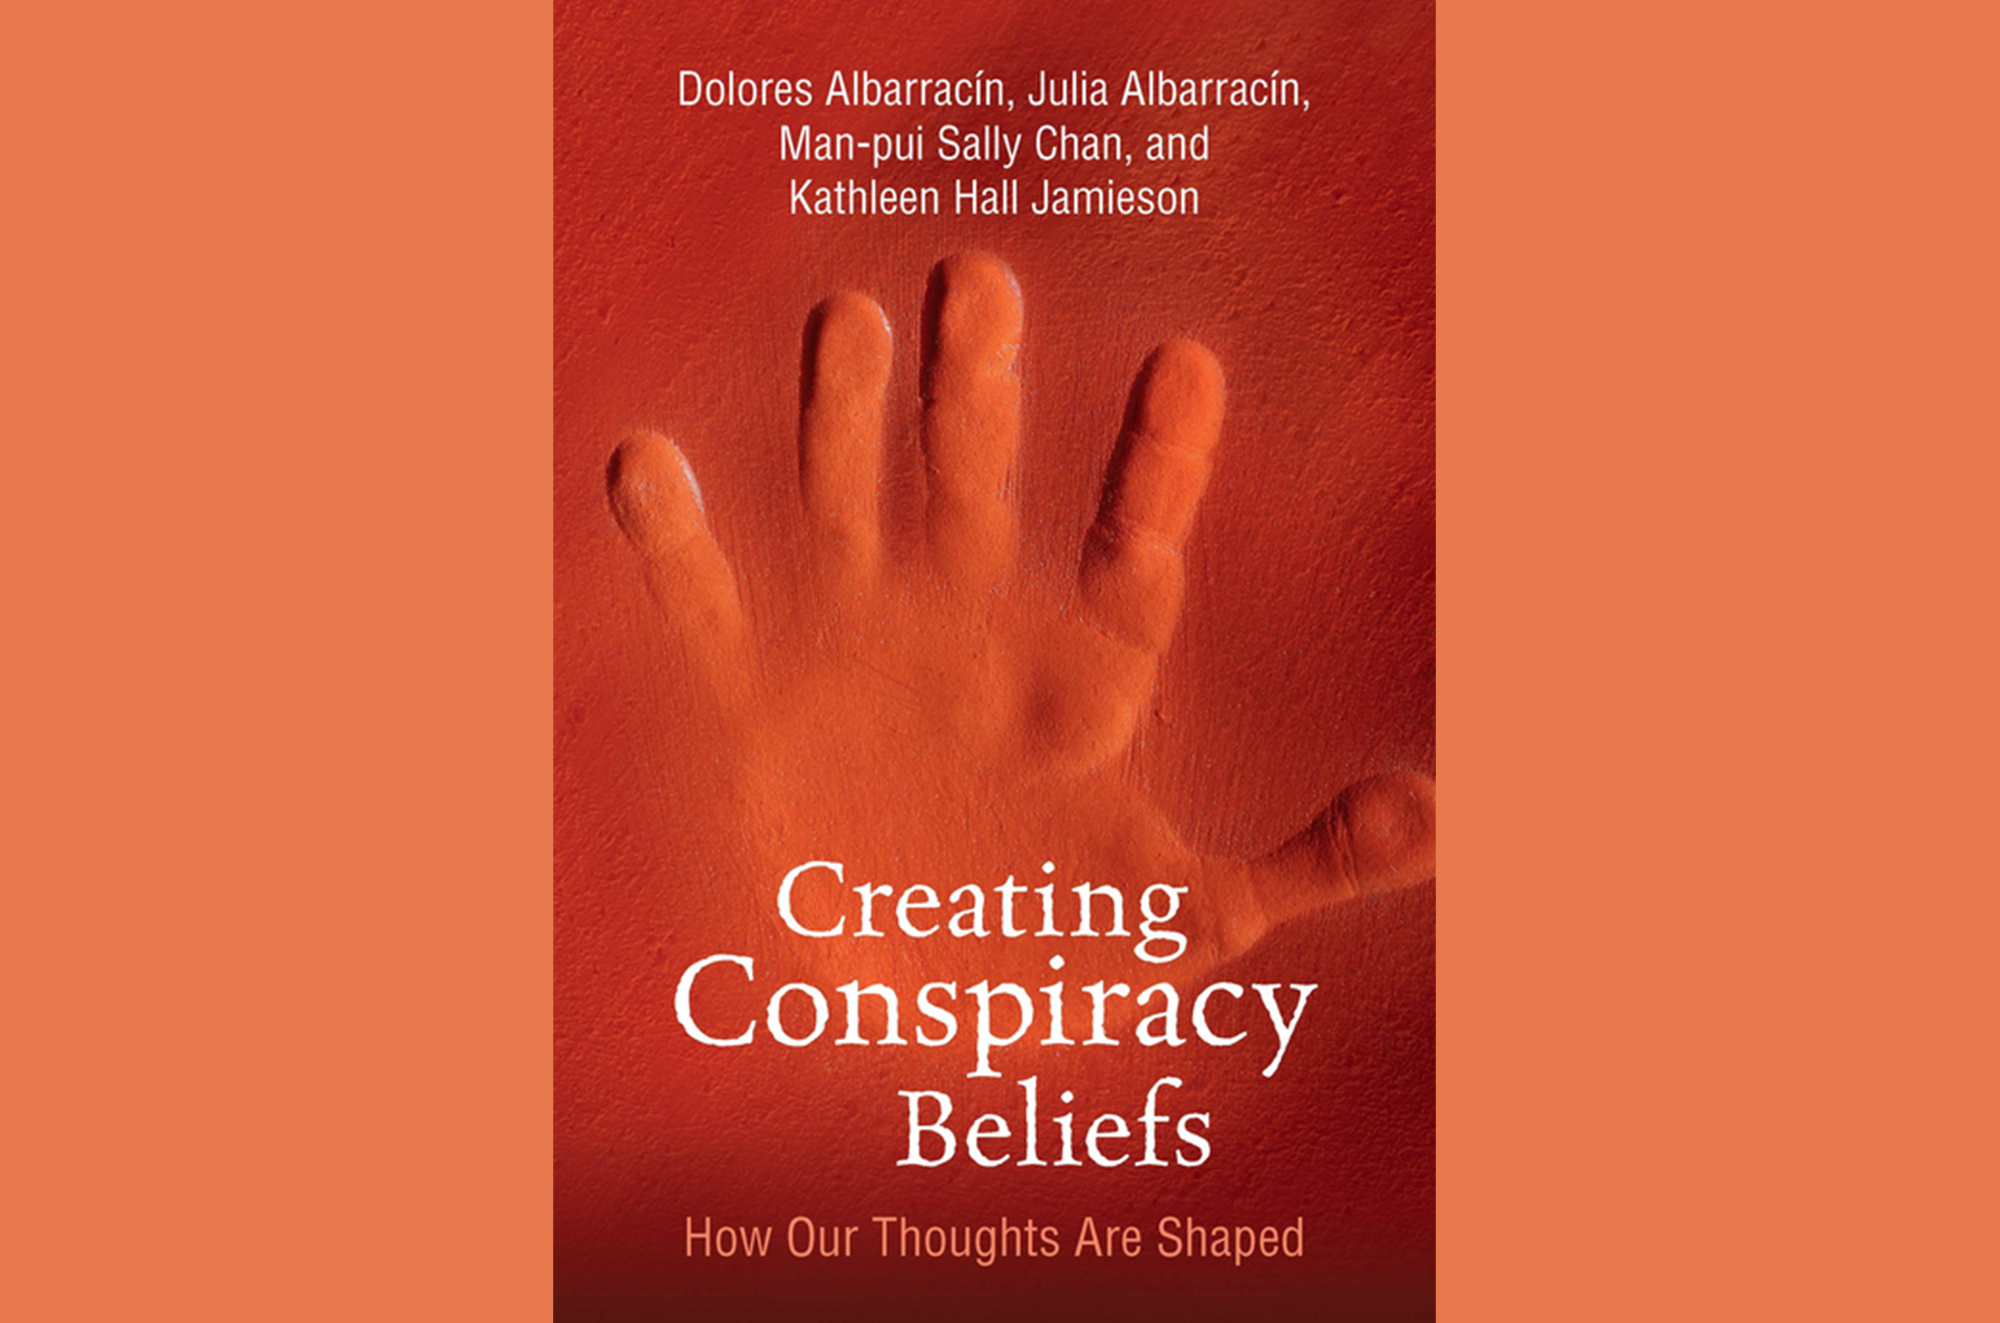 Cover of the book "Creating conspiracy beliefs: How our thoughts are shaped" by Dolores Albarracín, Julia Albarracín, Man-pui Sally Chan, and Kathleen Hall Jamieson